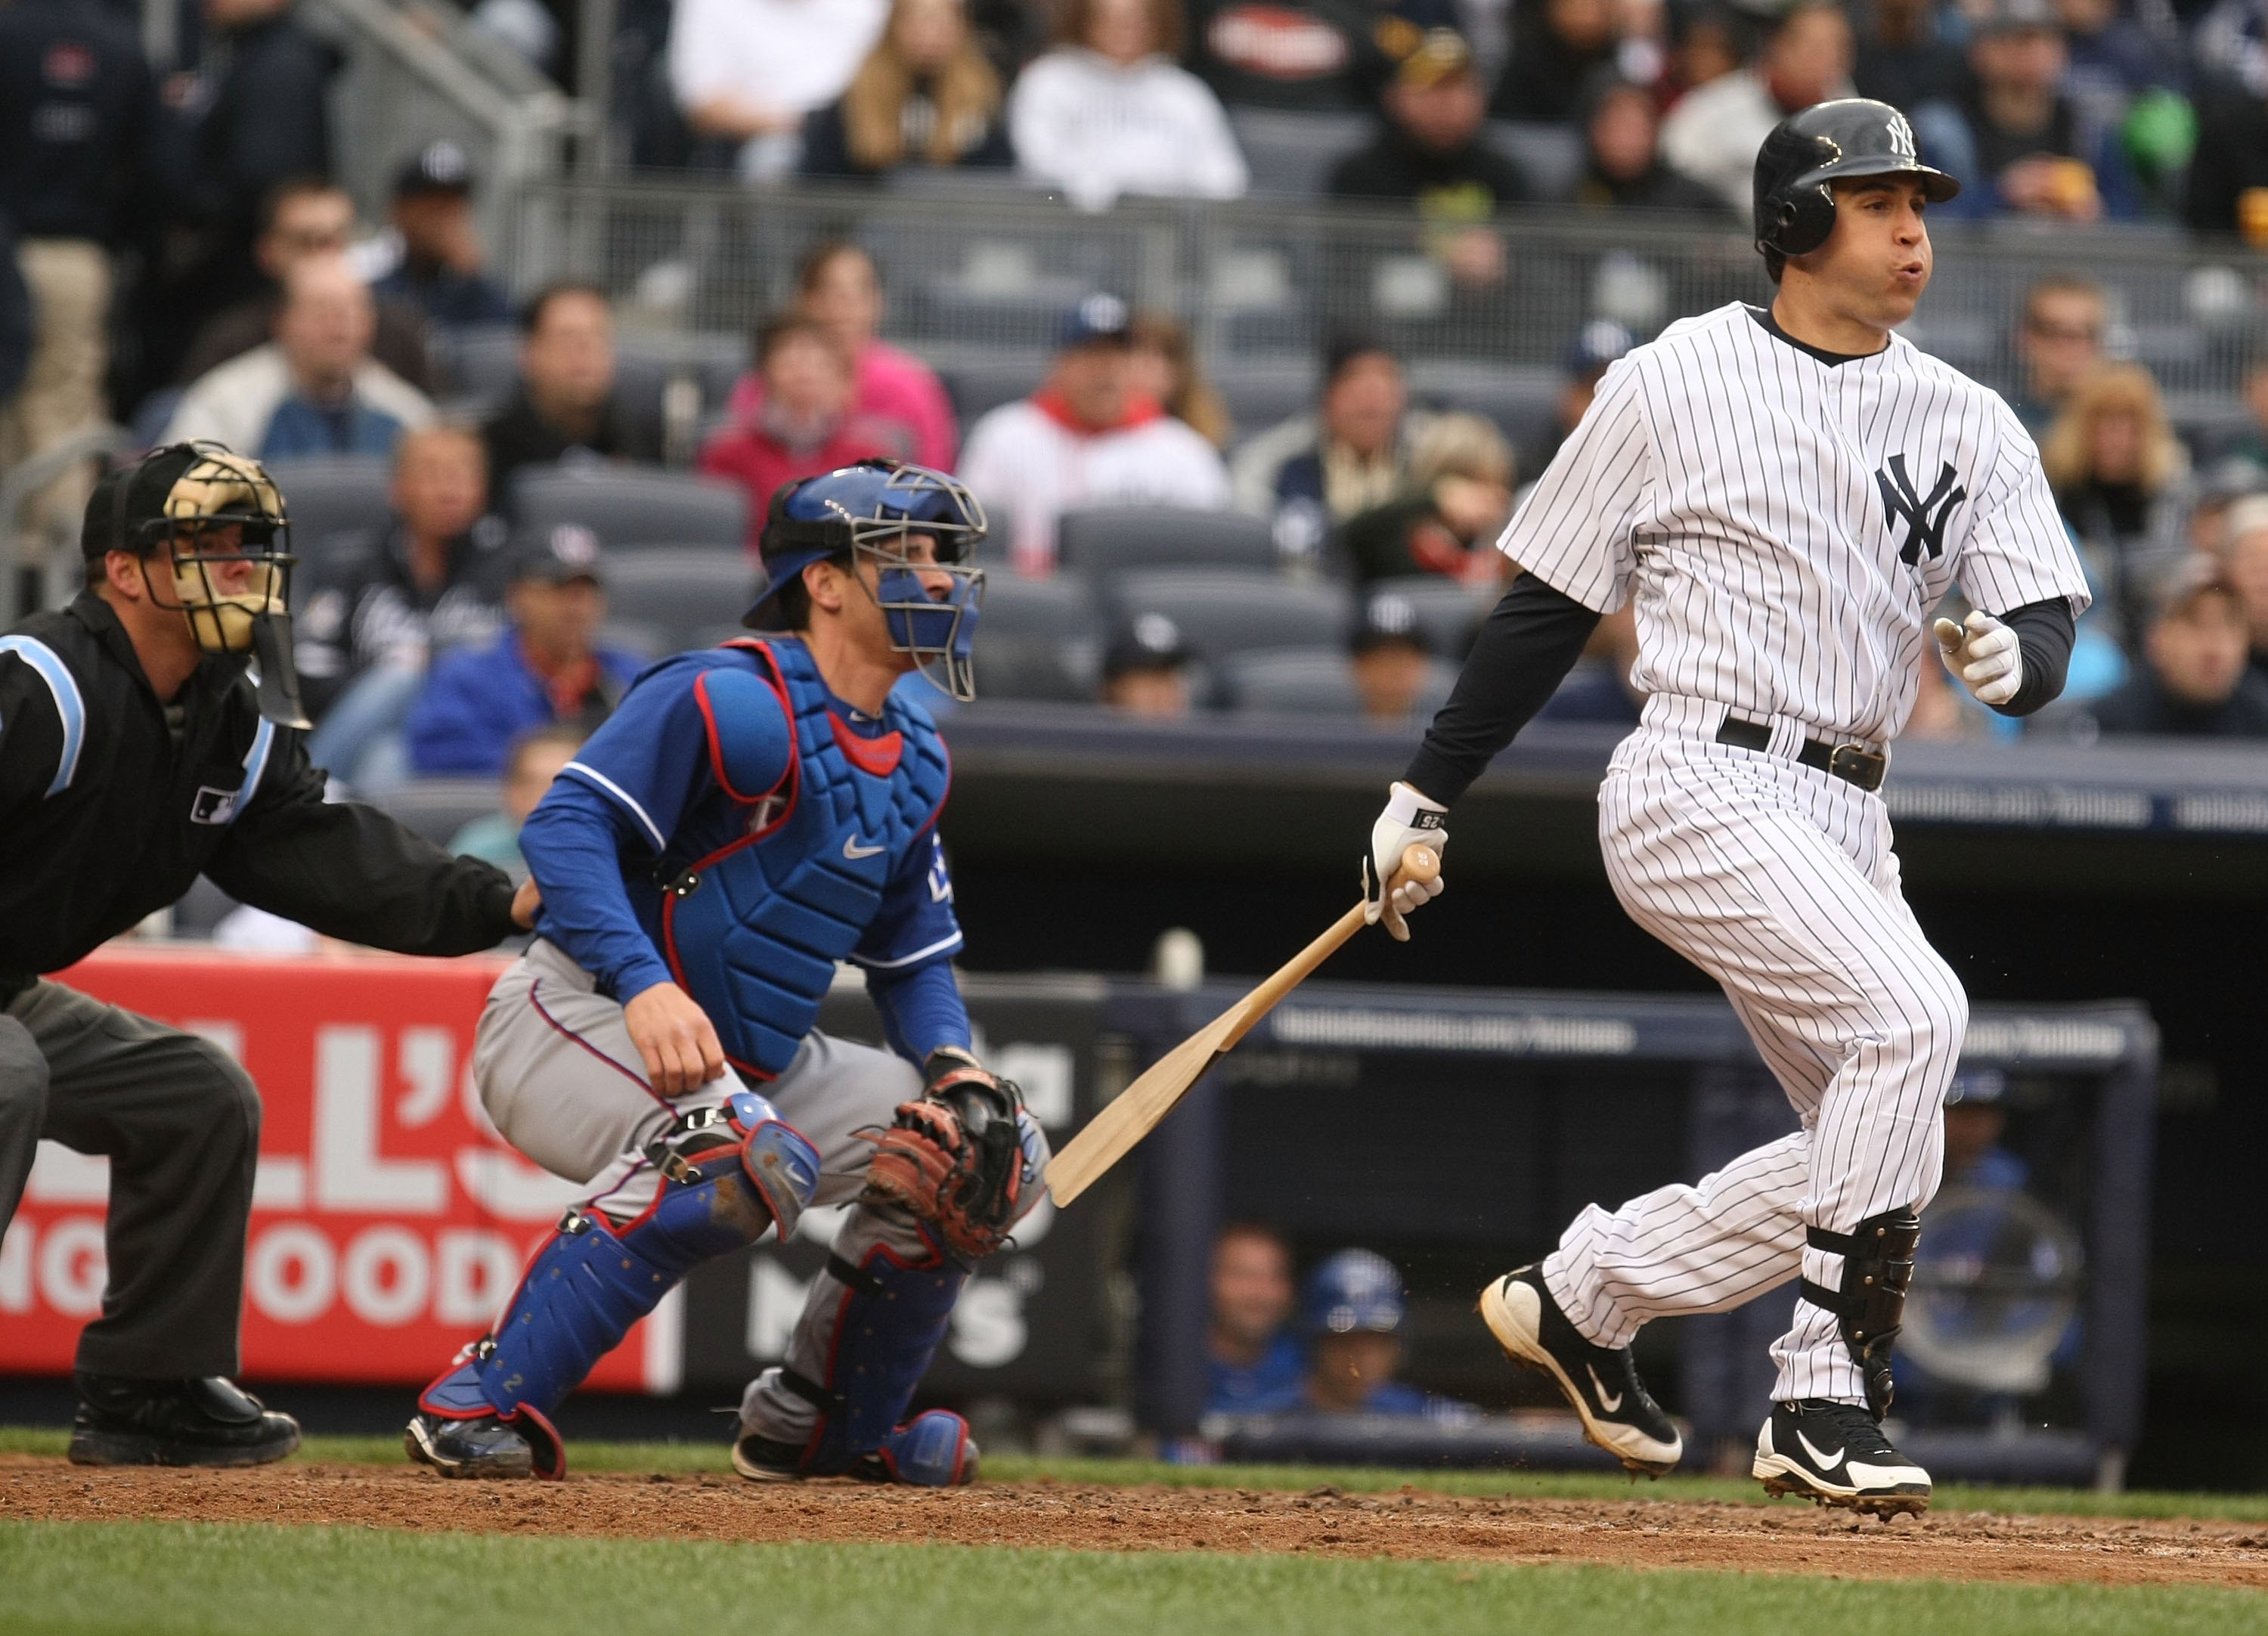 BRONX, NY - APRIL 17:  Mark Teixeira #25 of The New York Yankees drives in a run with a hit against the Texas Rangers during their game on April 17, 2010 at Yankee Stadium in the Bronx Borough of New York.  (Photo by Al Bello/Getty Images)